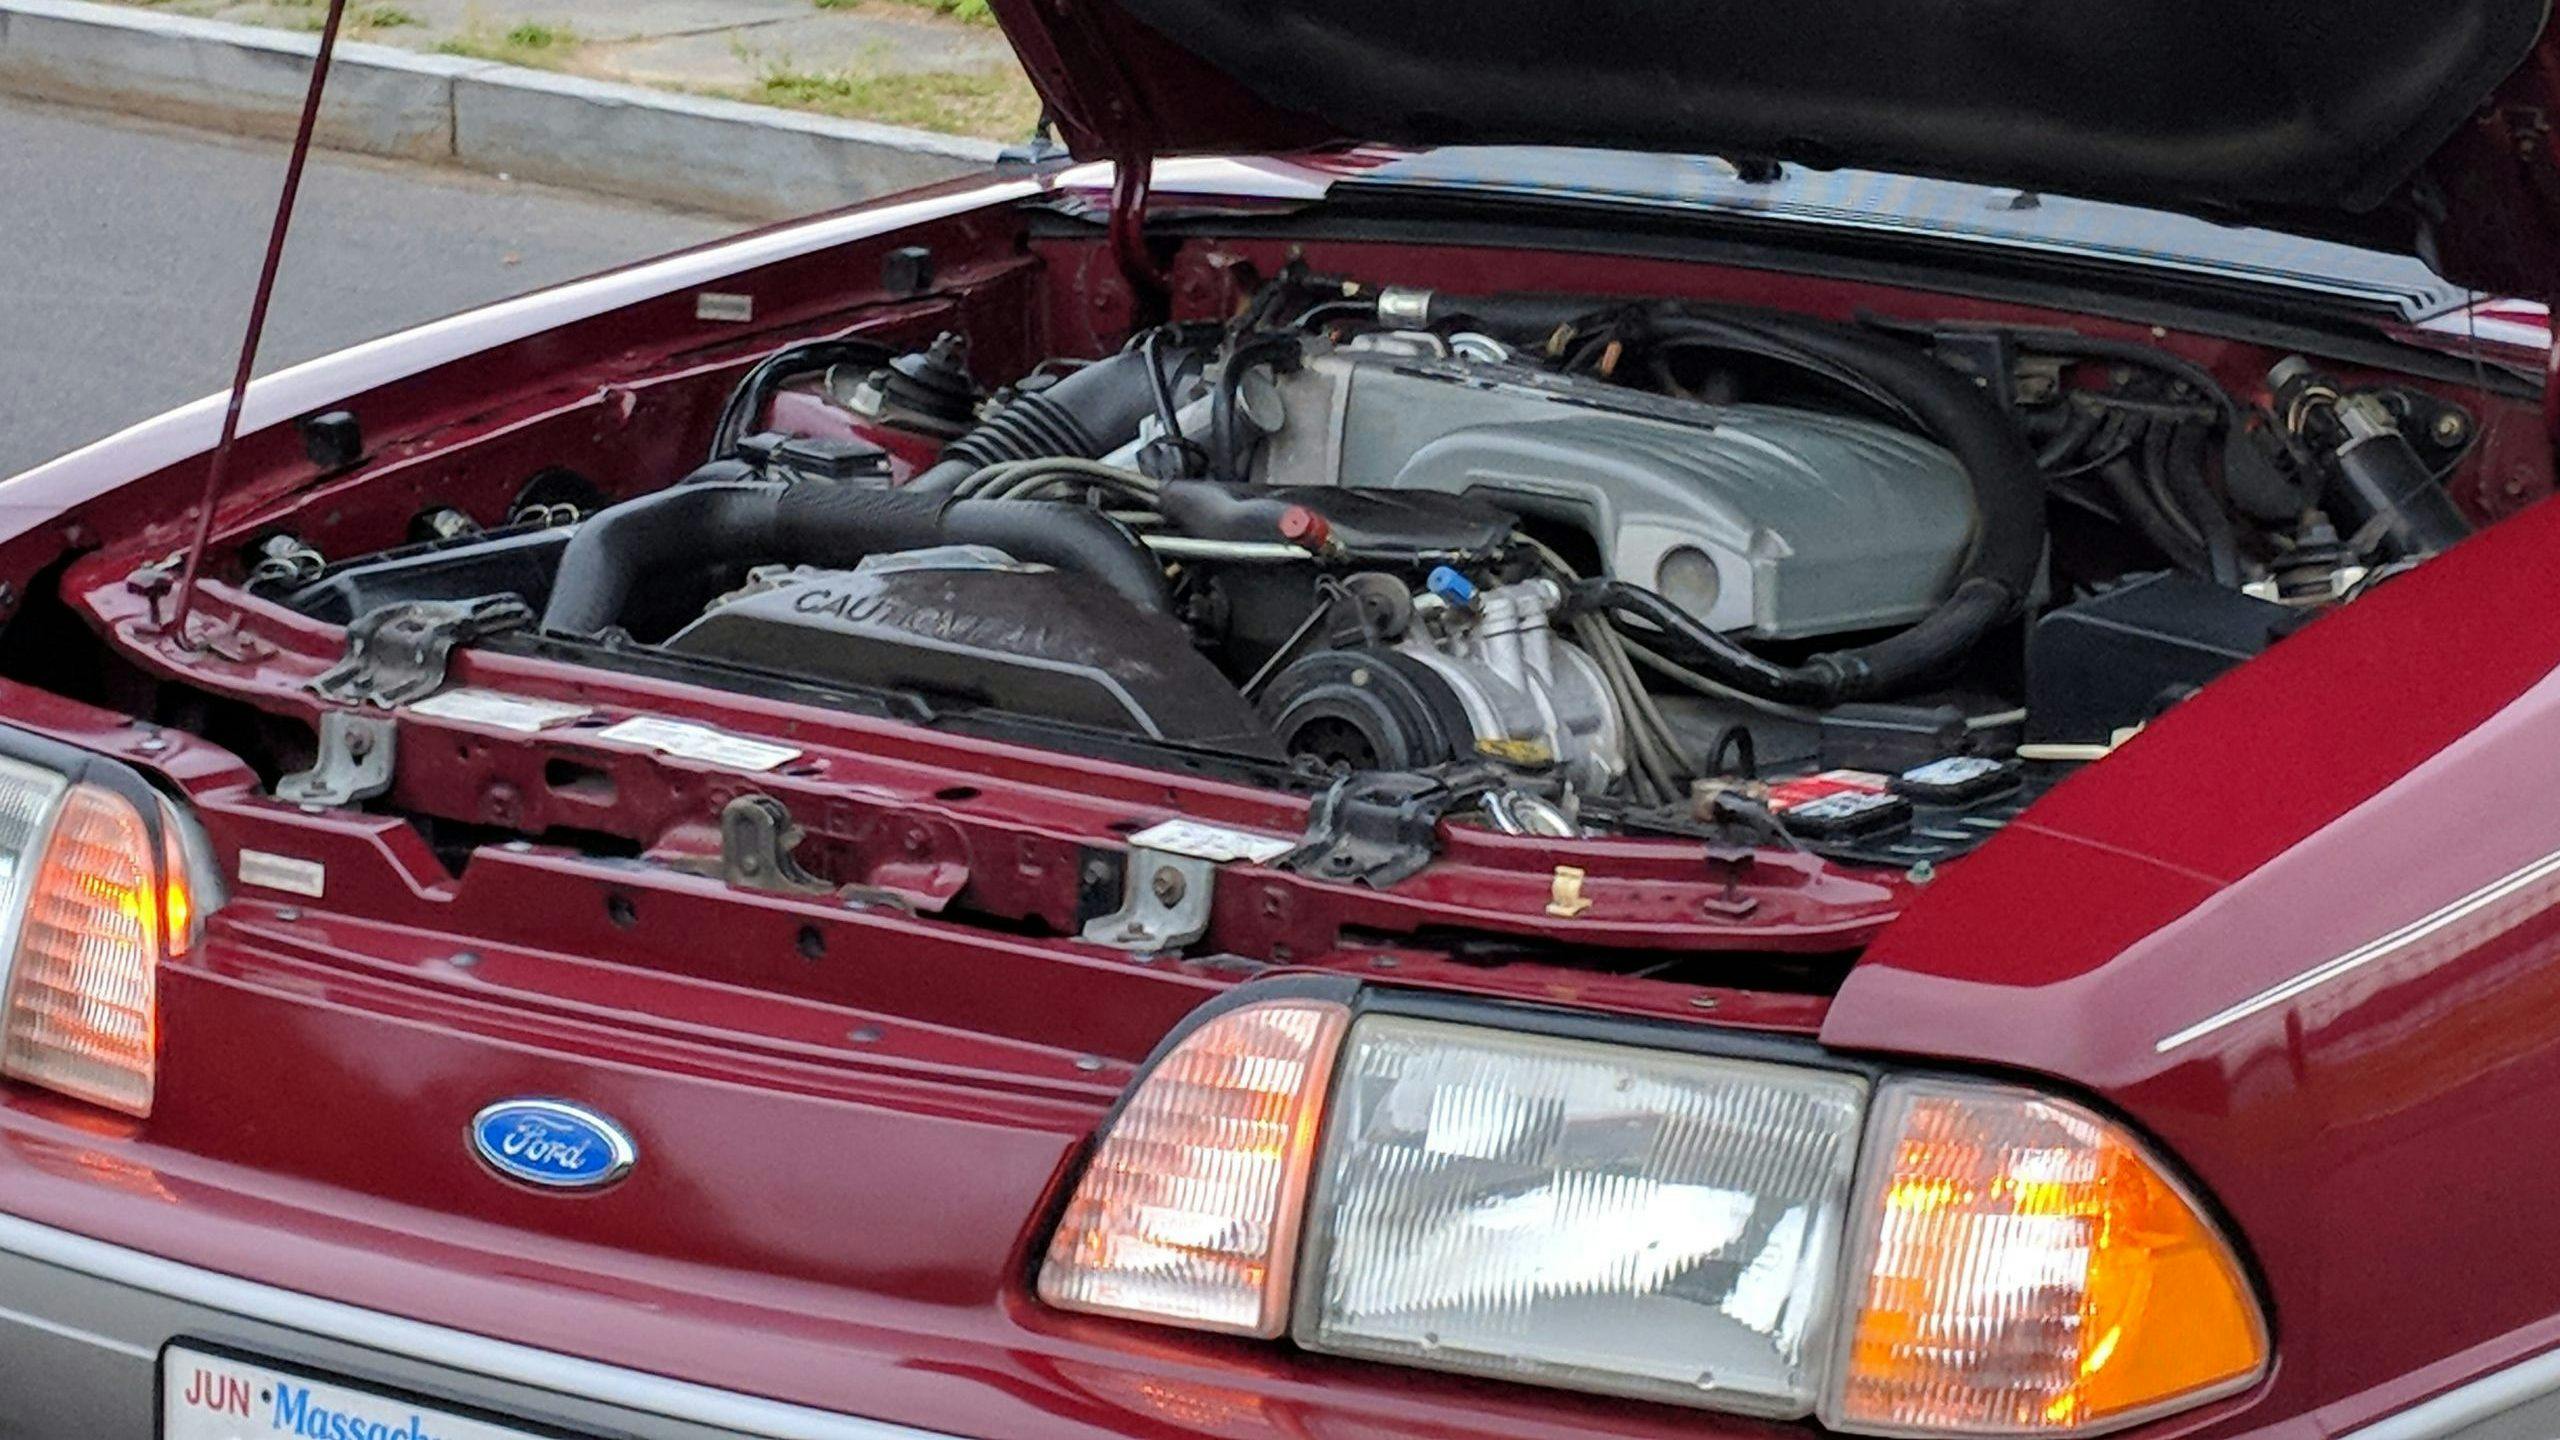 1989 Ford Mustang engine